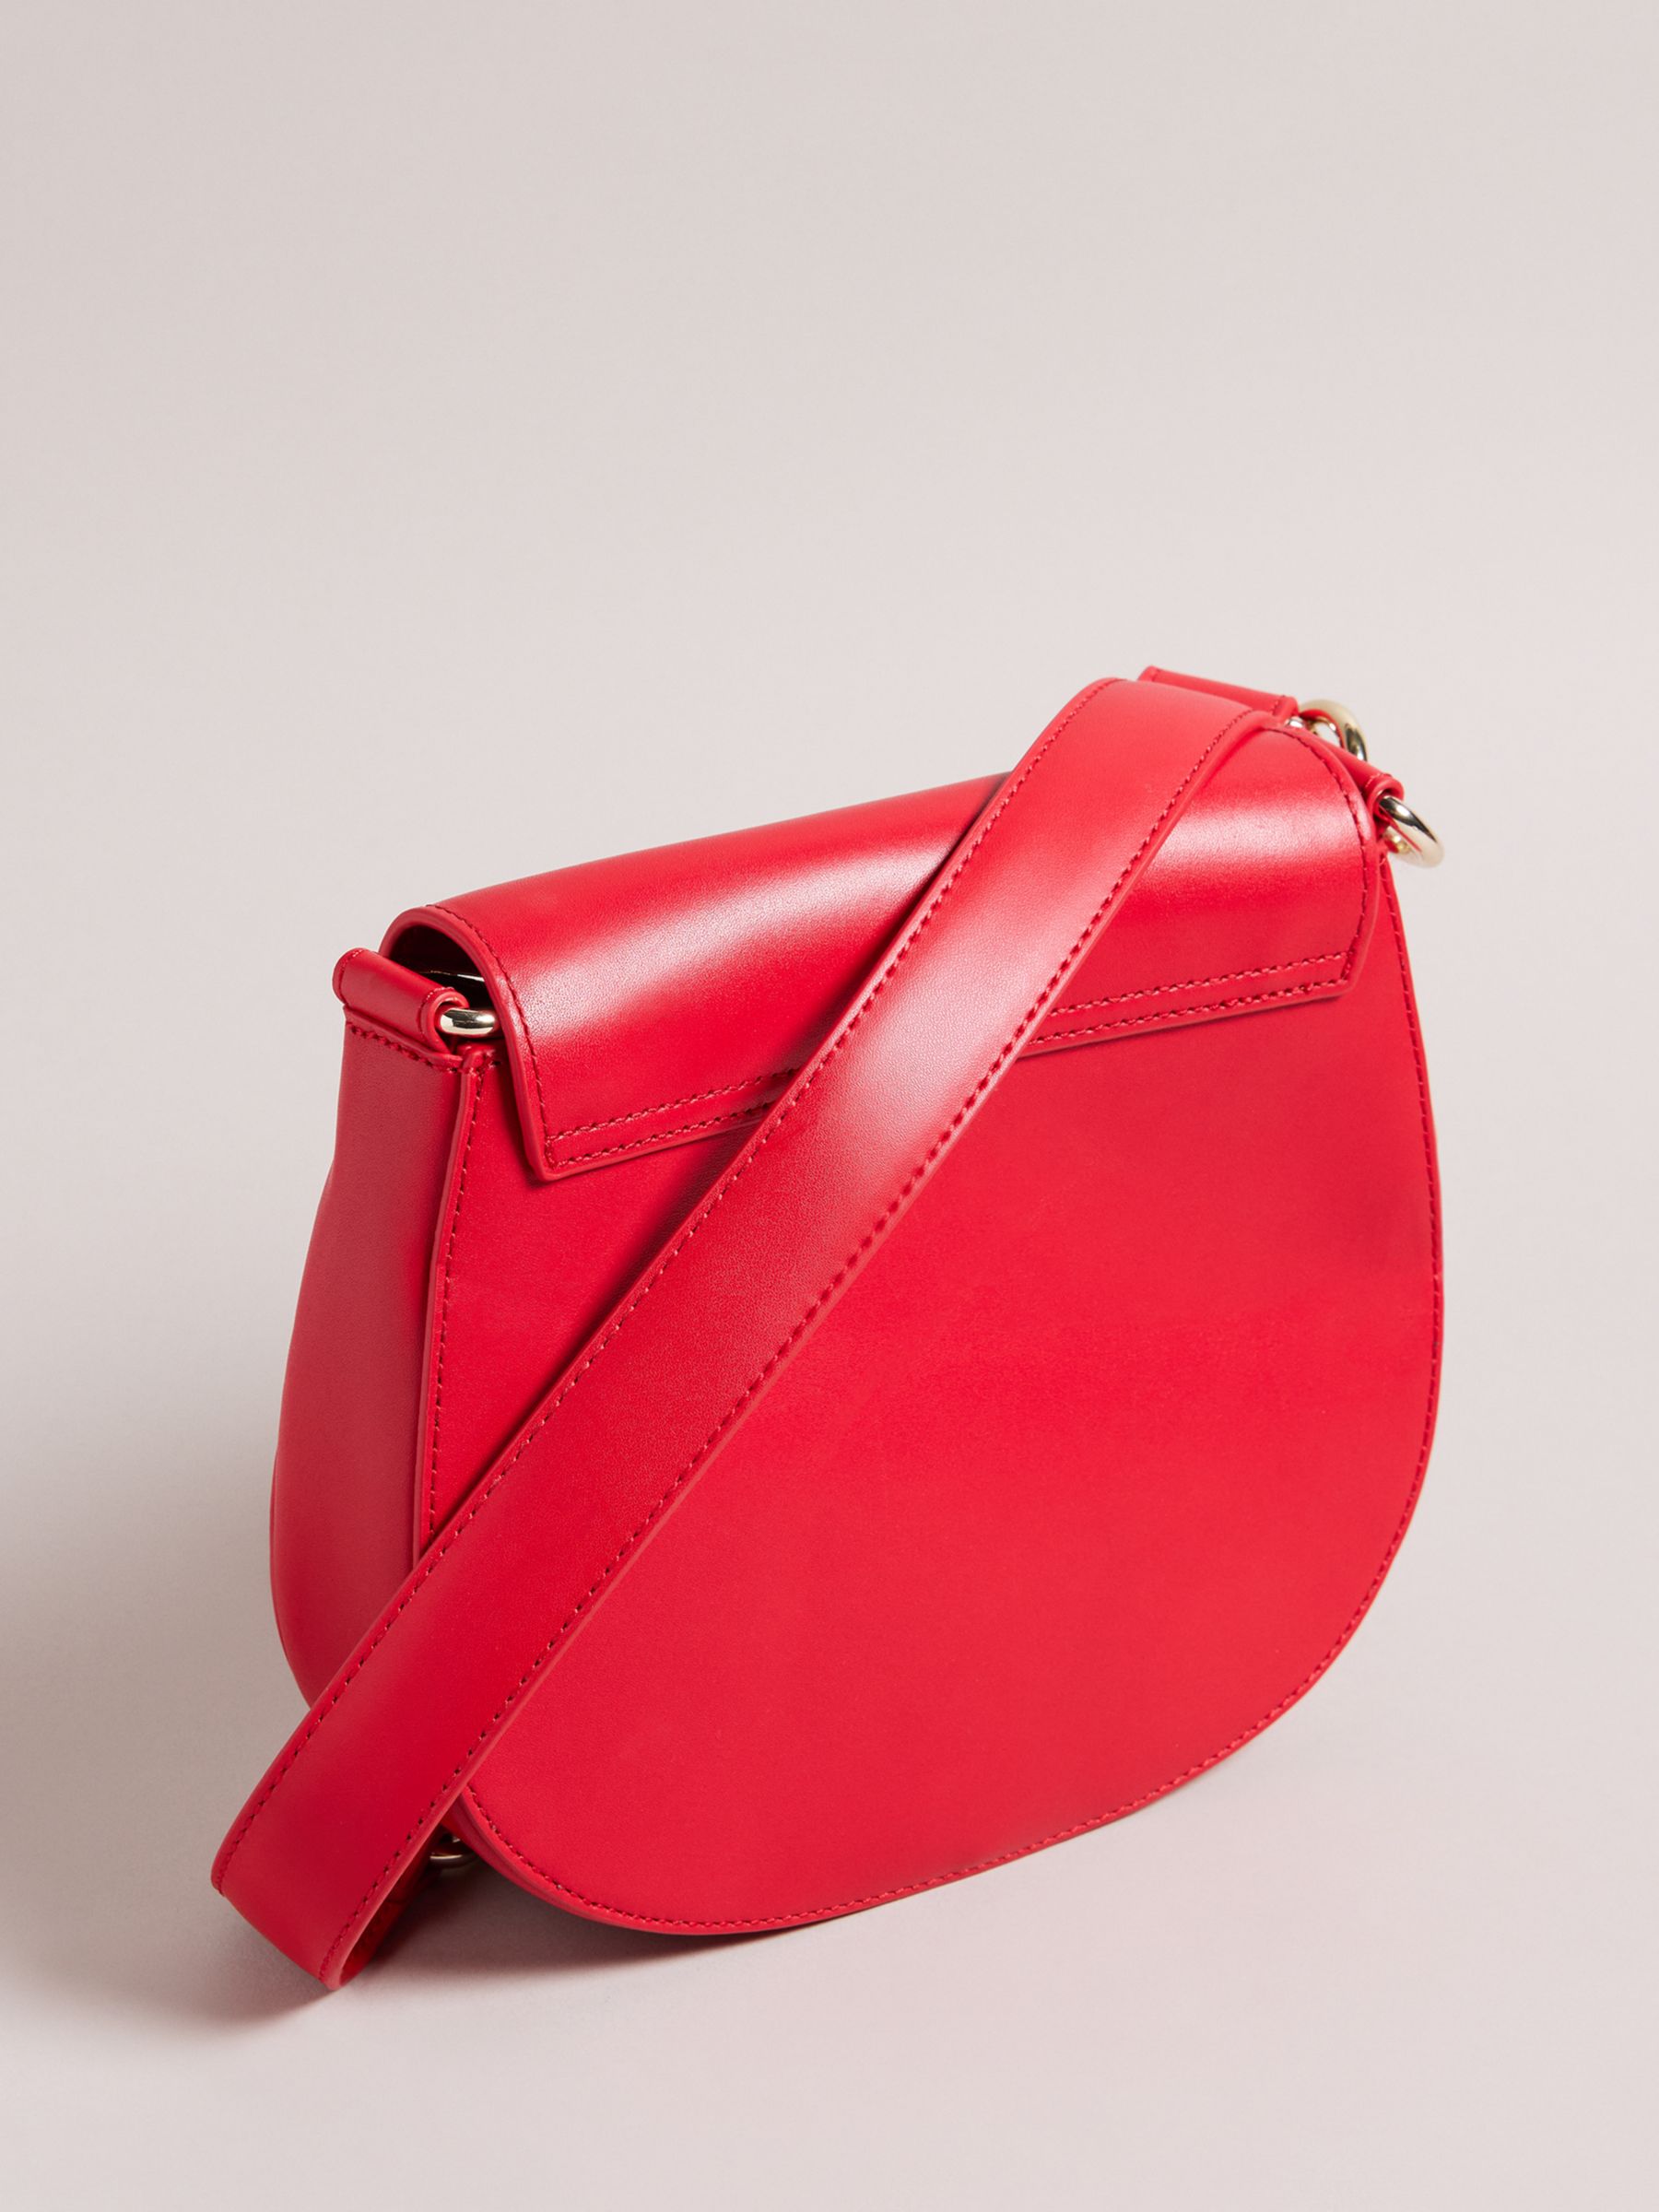 Ted Baker Darcell Leather Cross Body Bag, Red at John Lewis & Partners